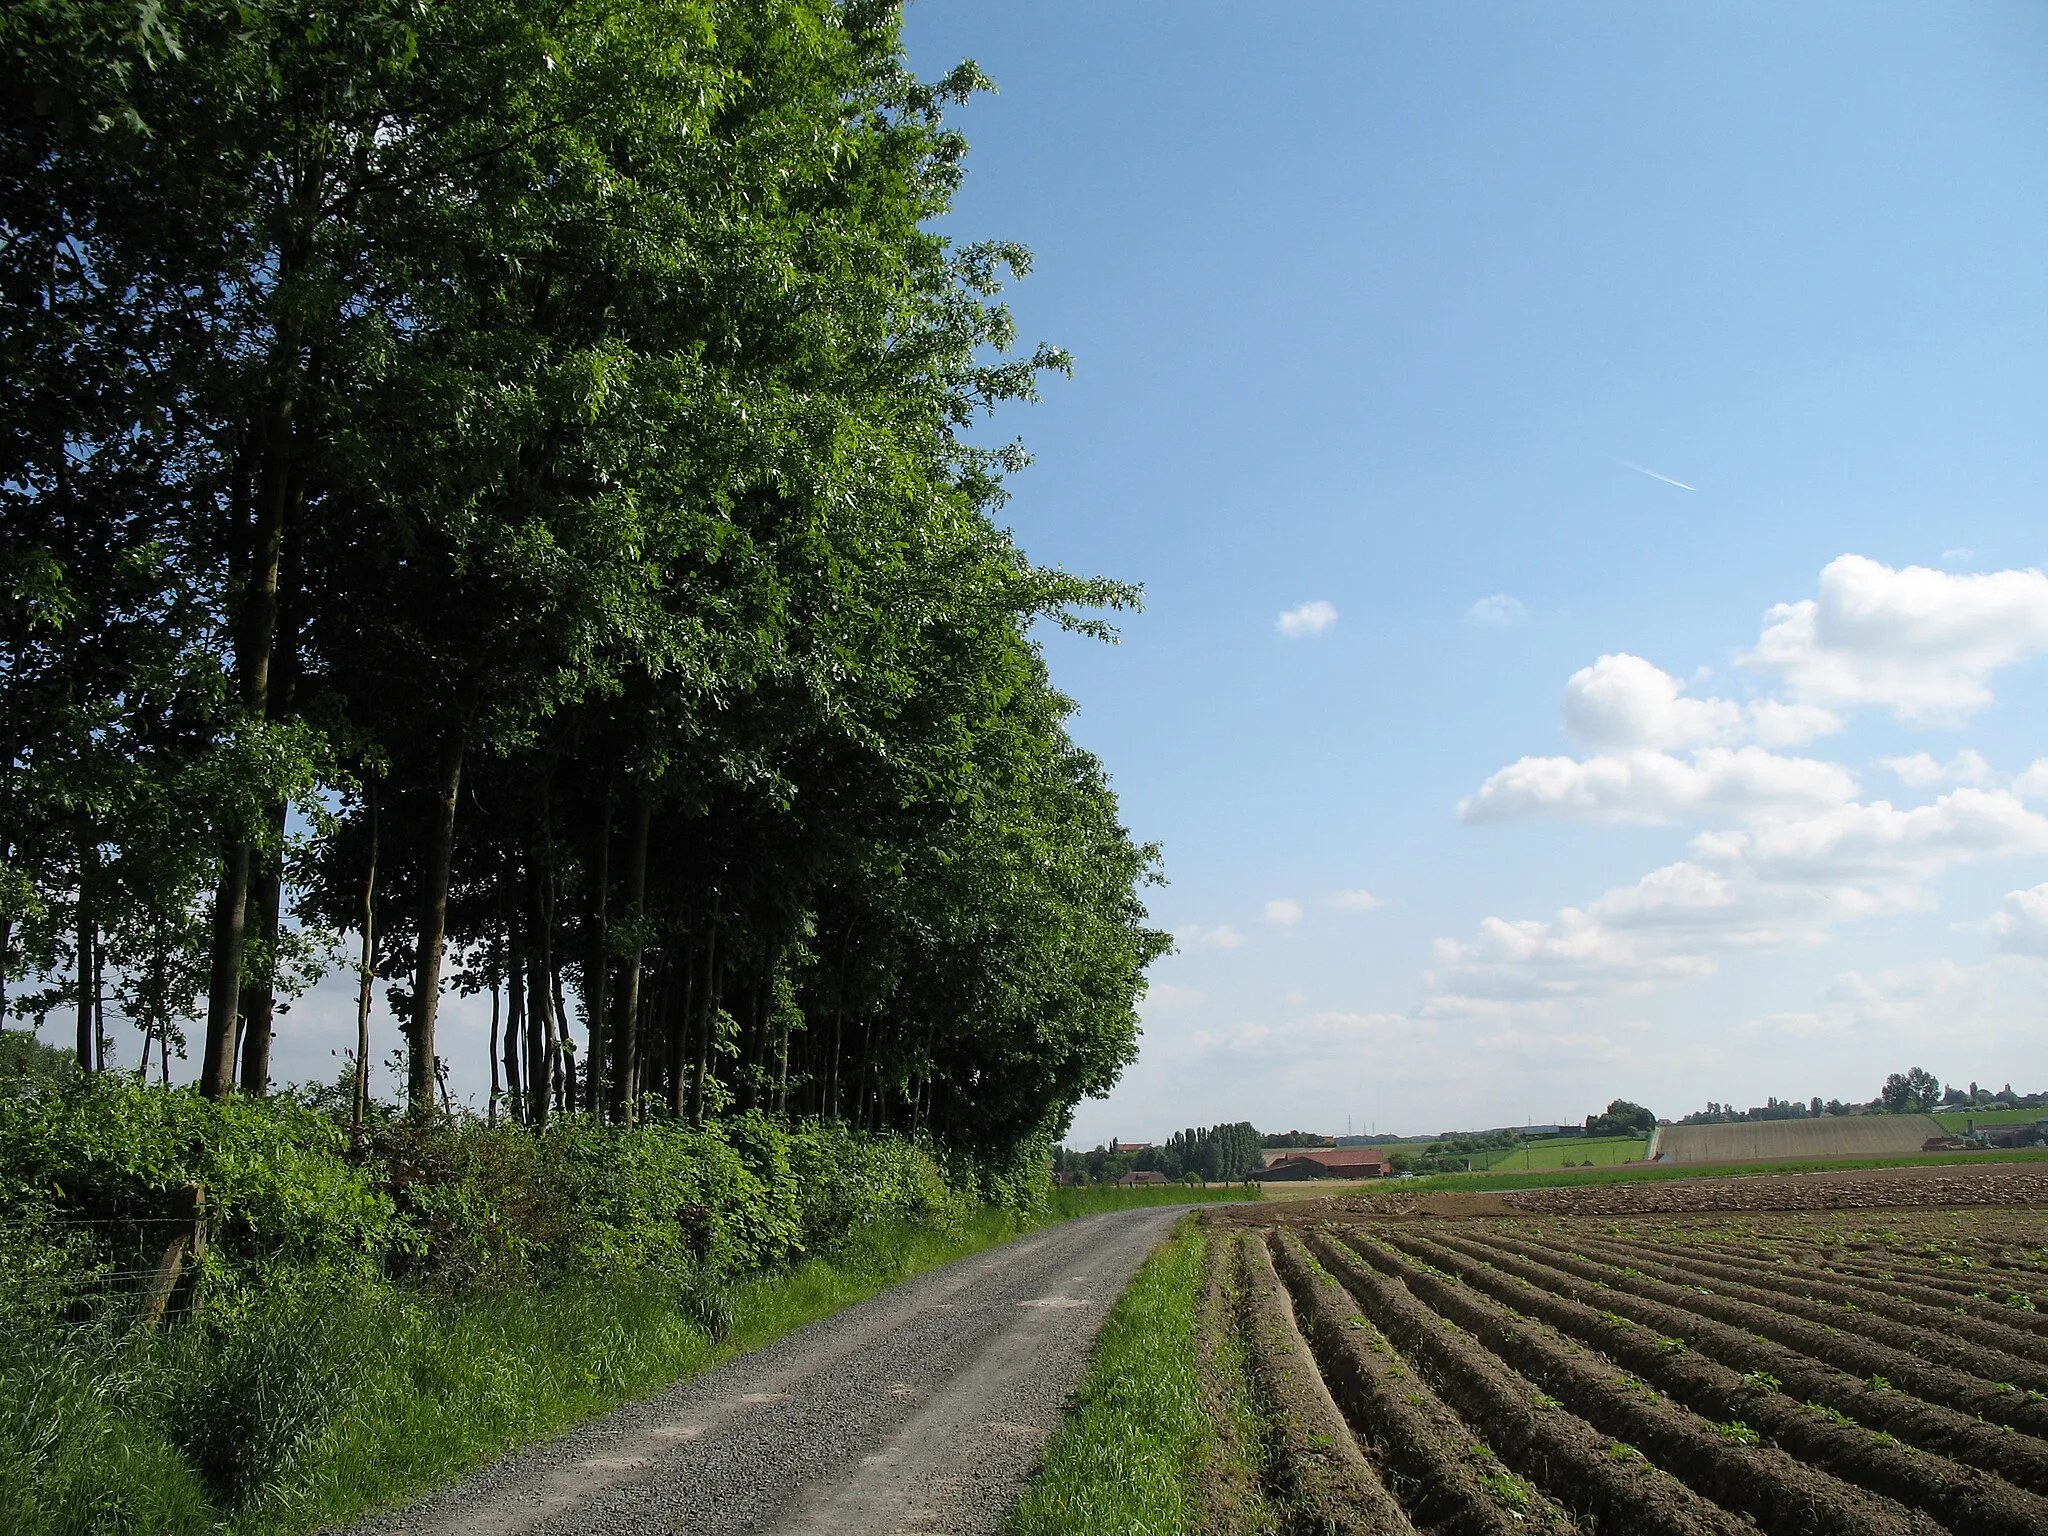 Photo showing: The countryside of the Ingooigem province of West Flanders, Belgium.  On the right are the slopes of Tiegemberg Hill.